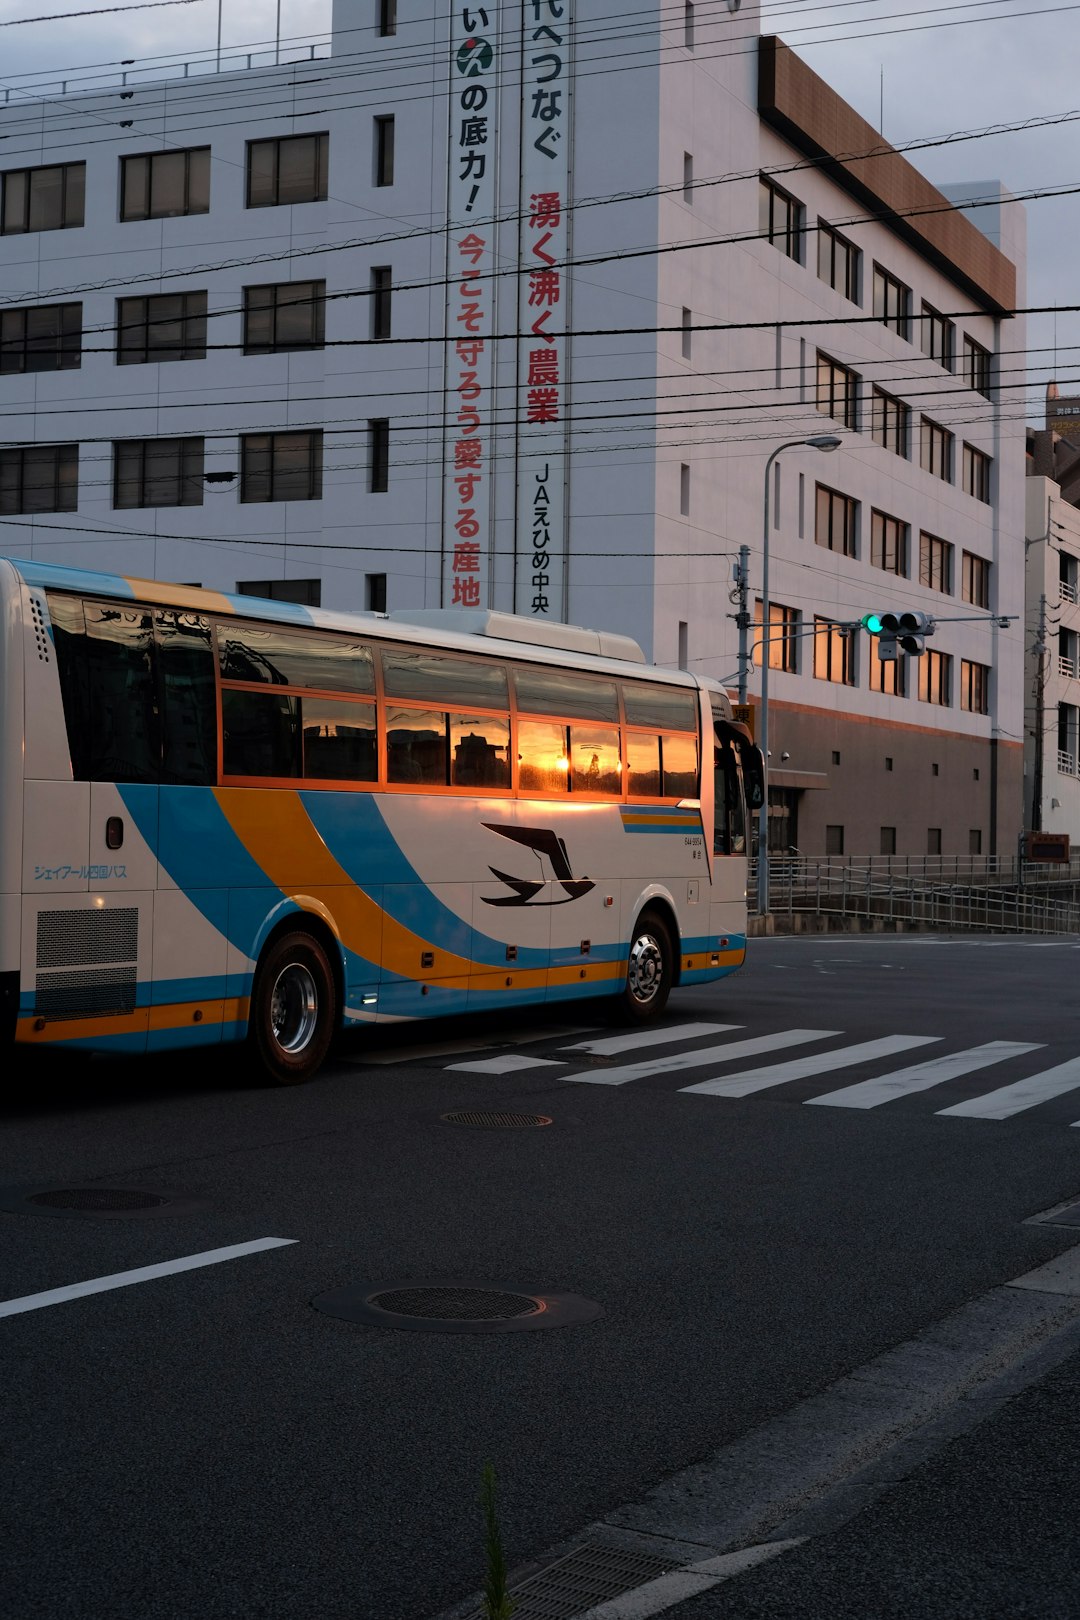 white blue and yellow bus on road during daytime